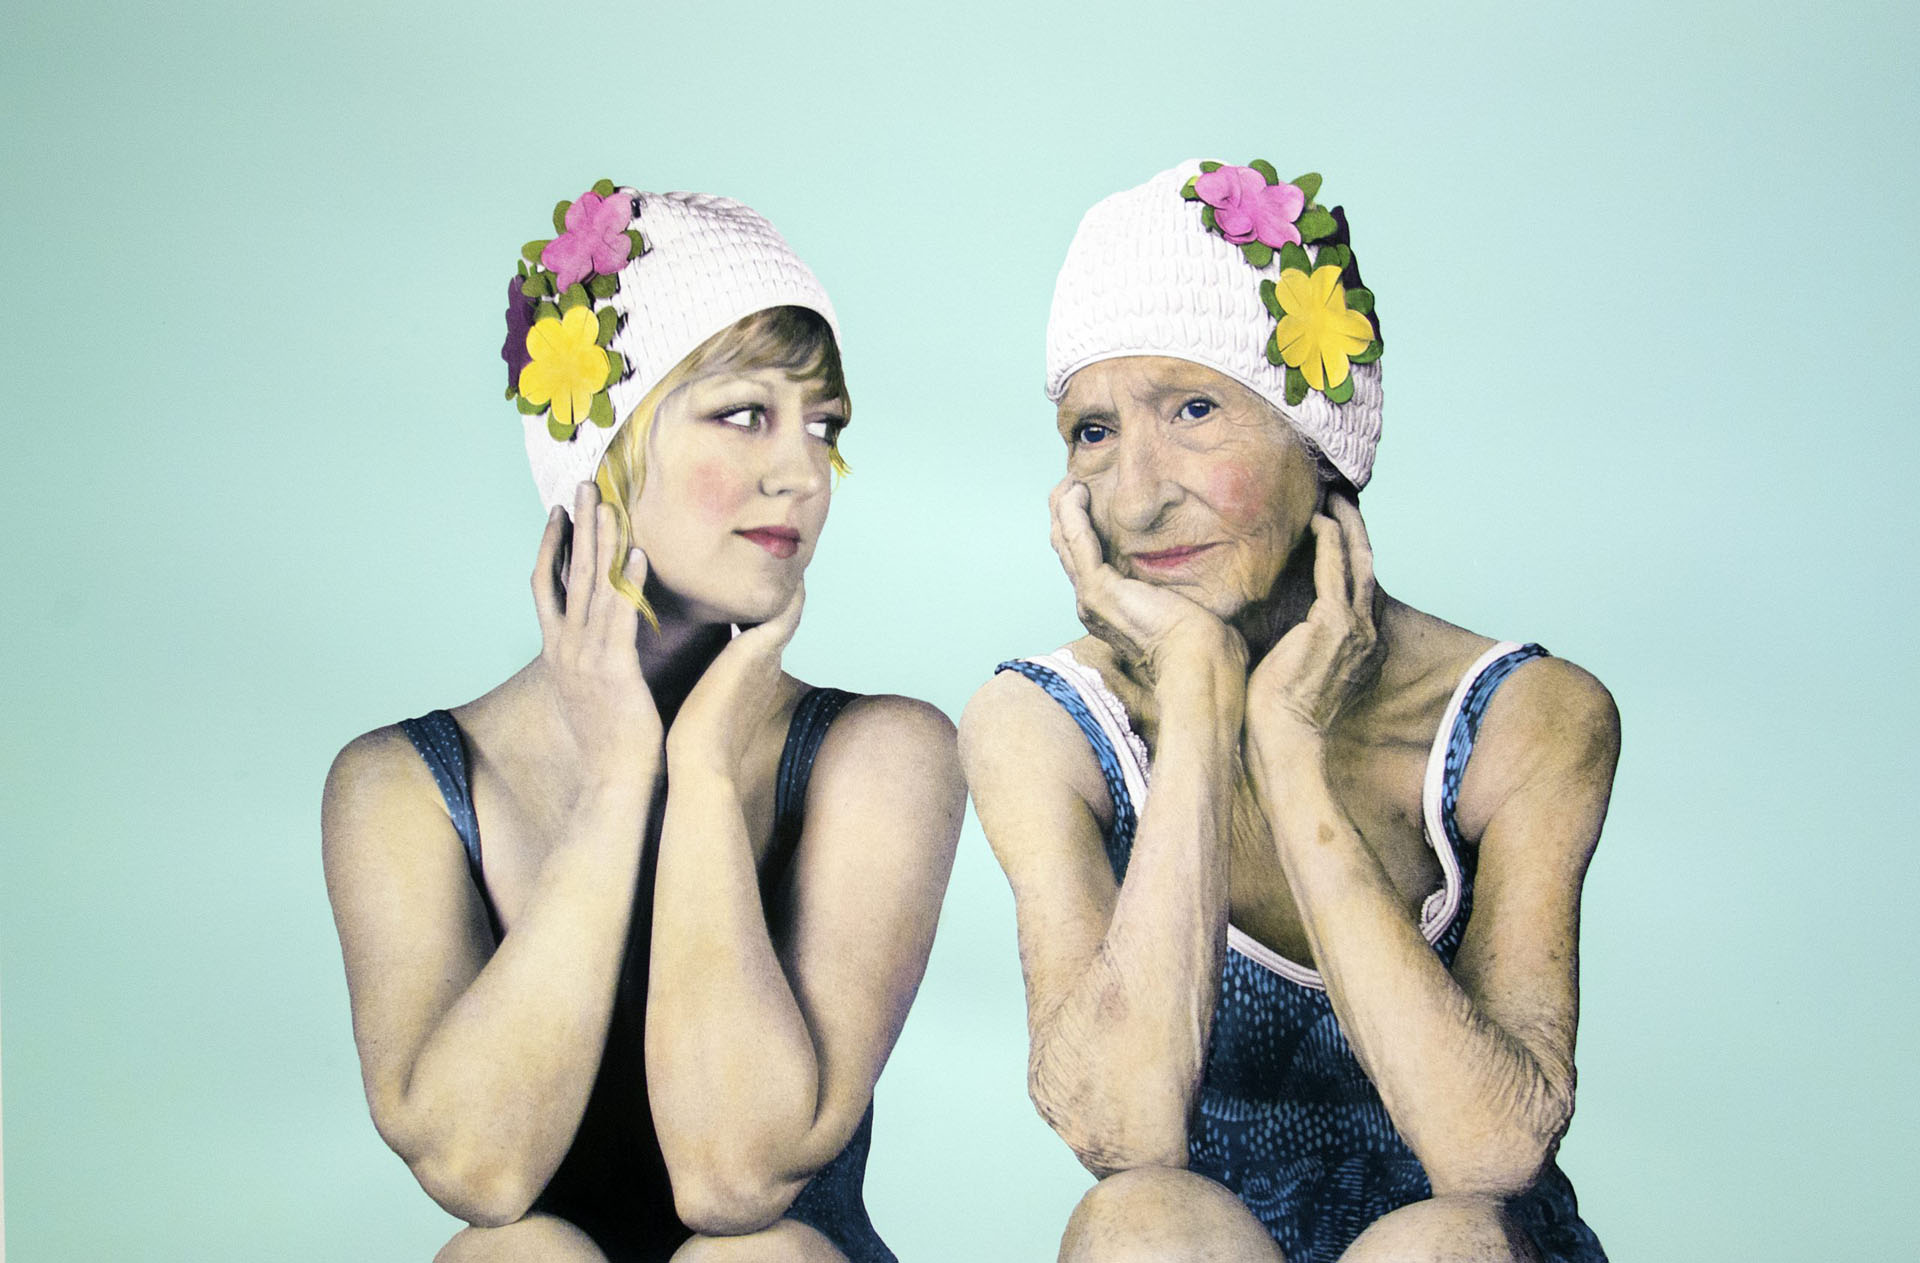 Synchronized Swimmers – An interview with artist Jenny Fine